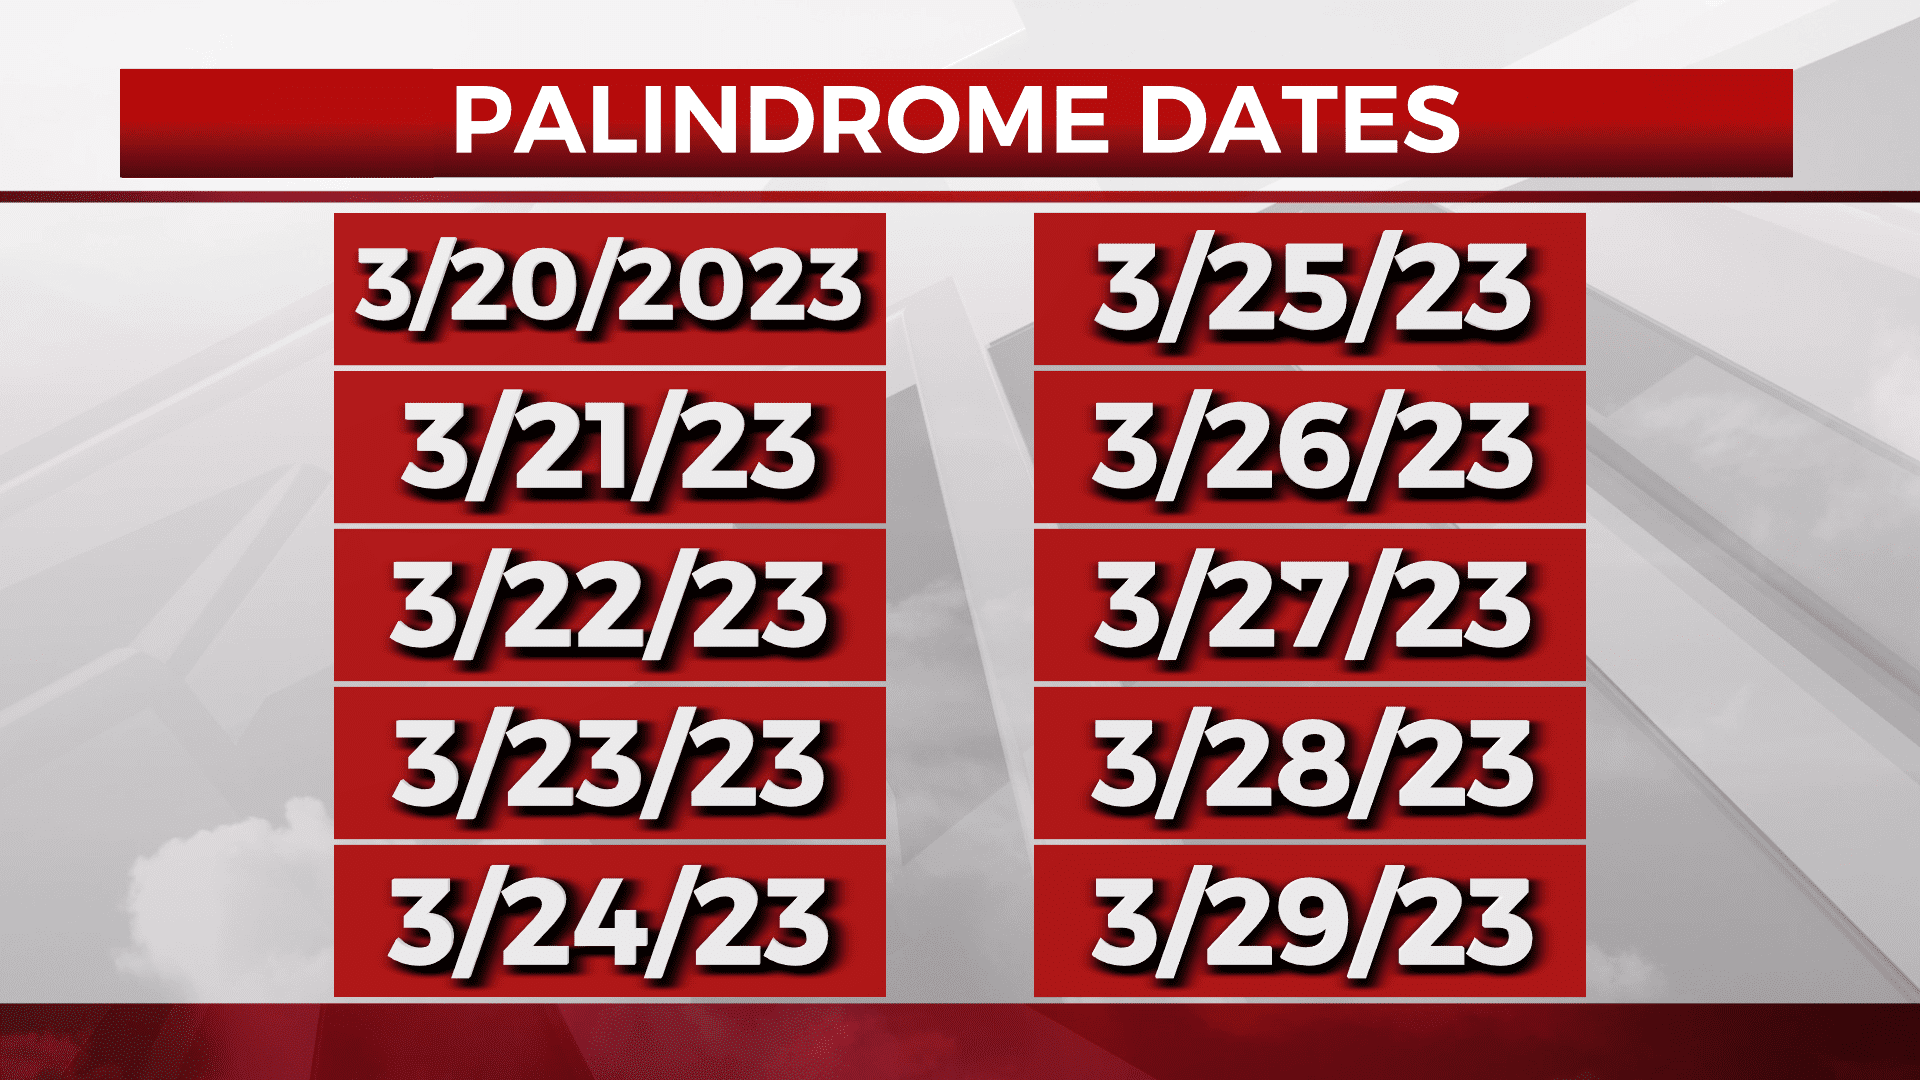 List of dates from 3/20/23 to 3/29/23